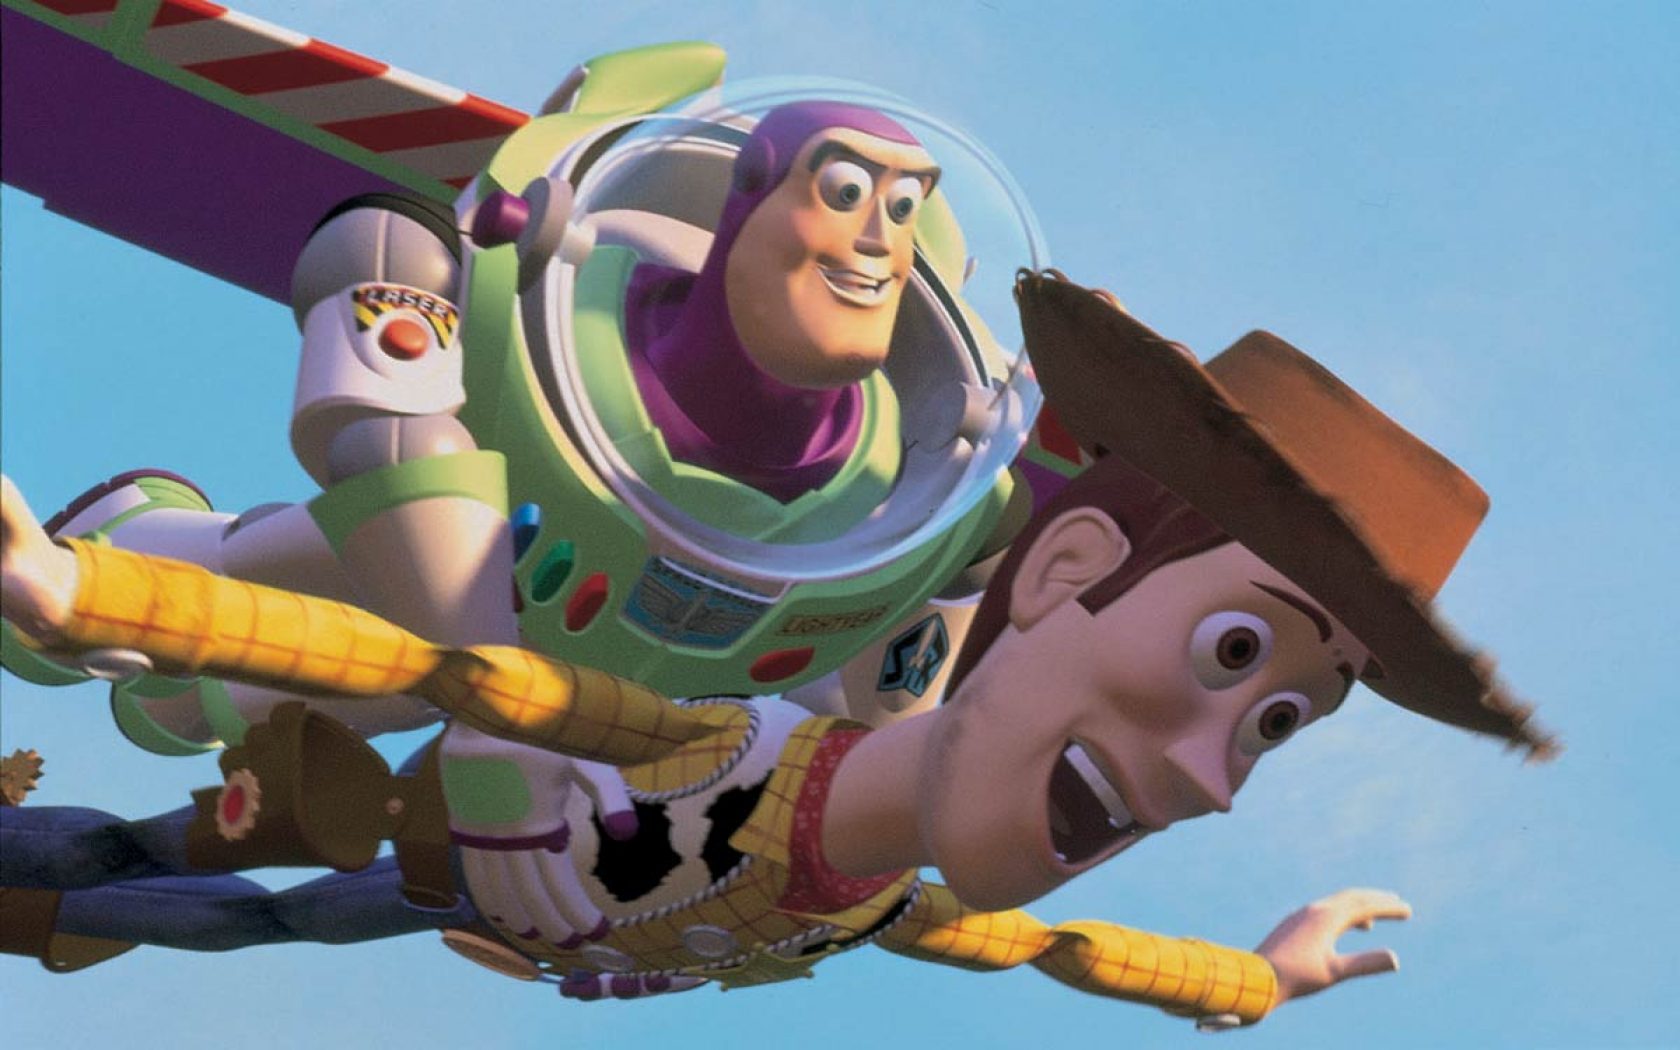 99. Toy Story (1995)